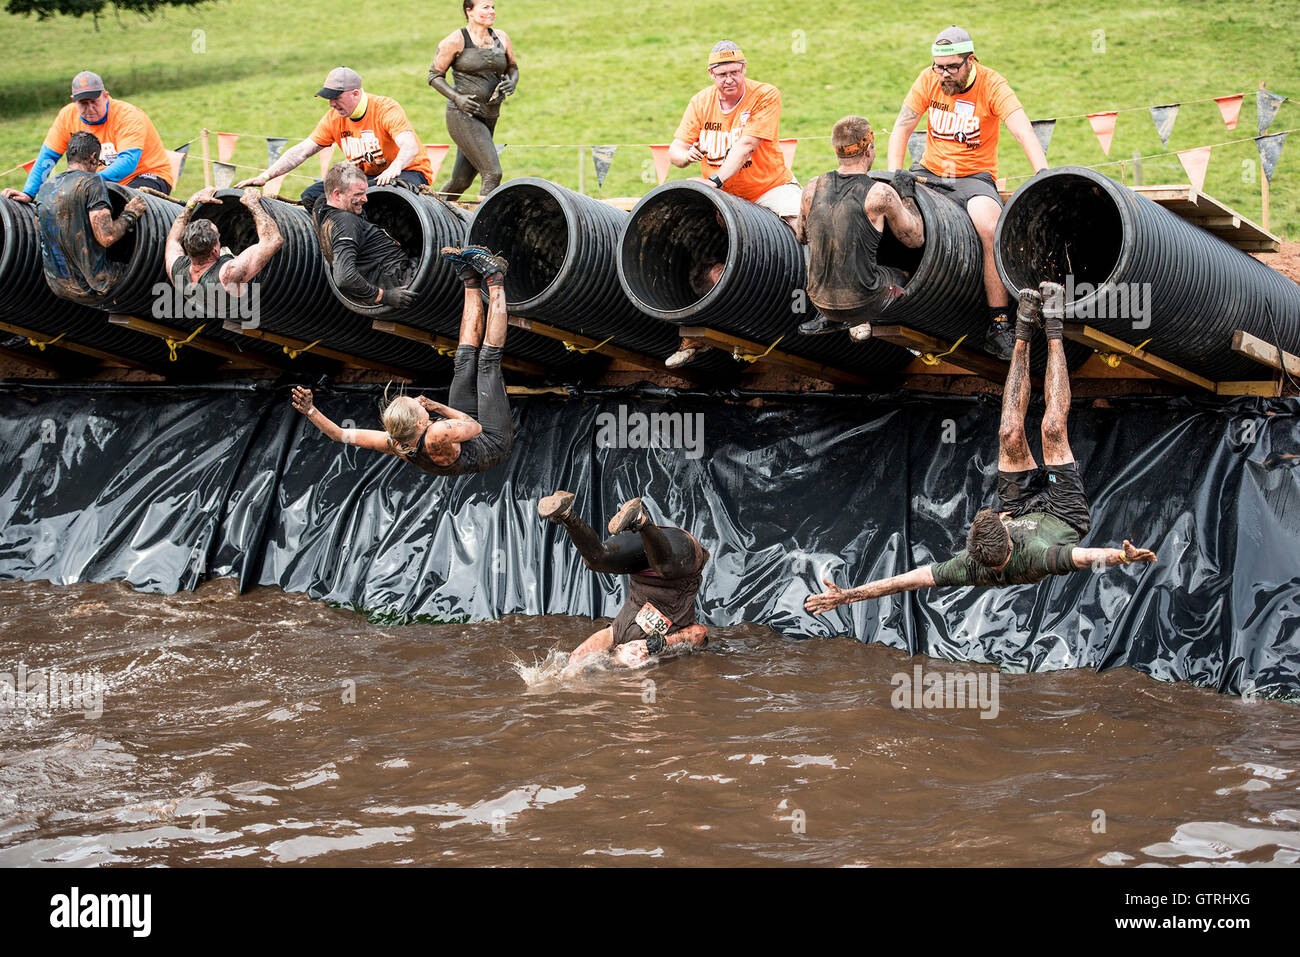 Cheshire, UK 10th September 2016. Competitors jump back into the ...